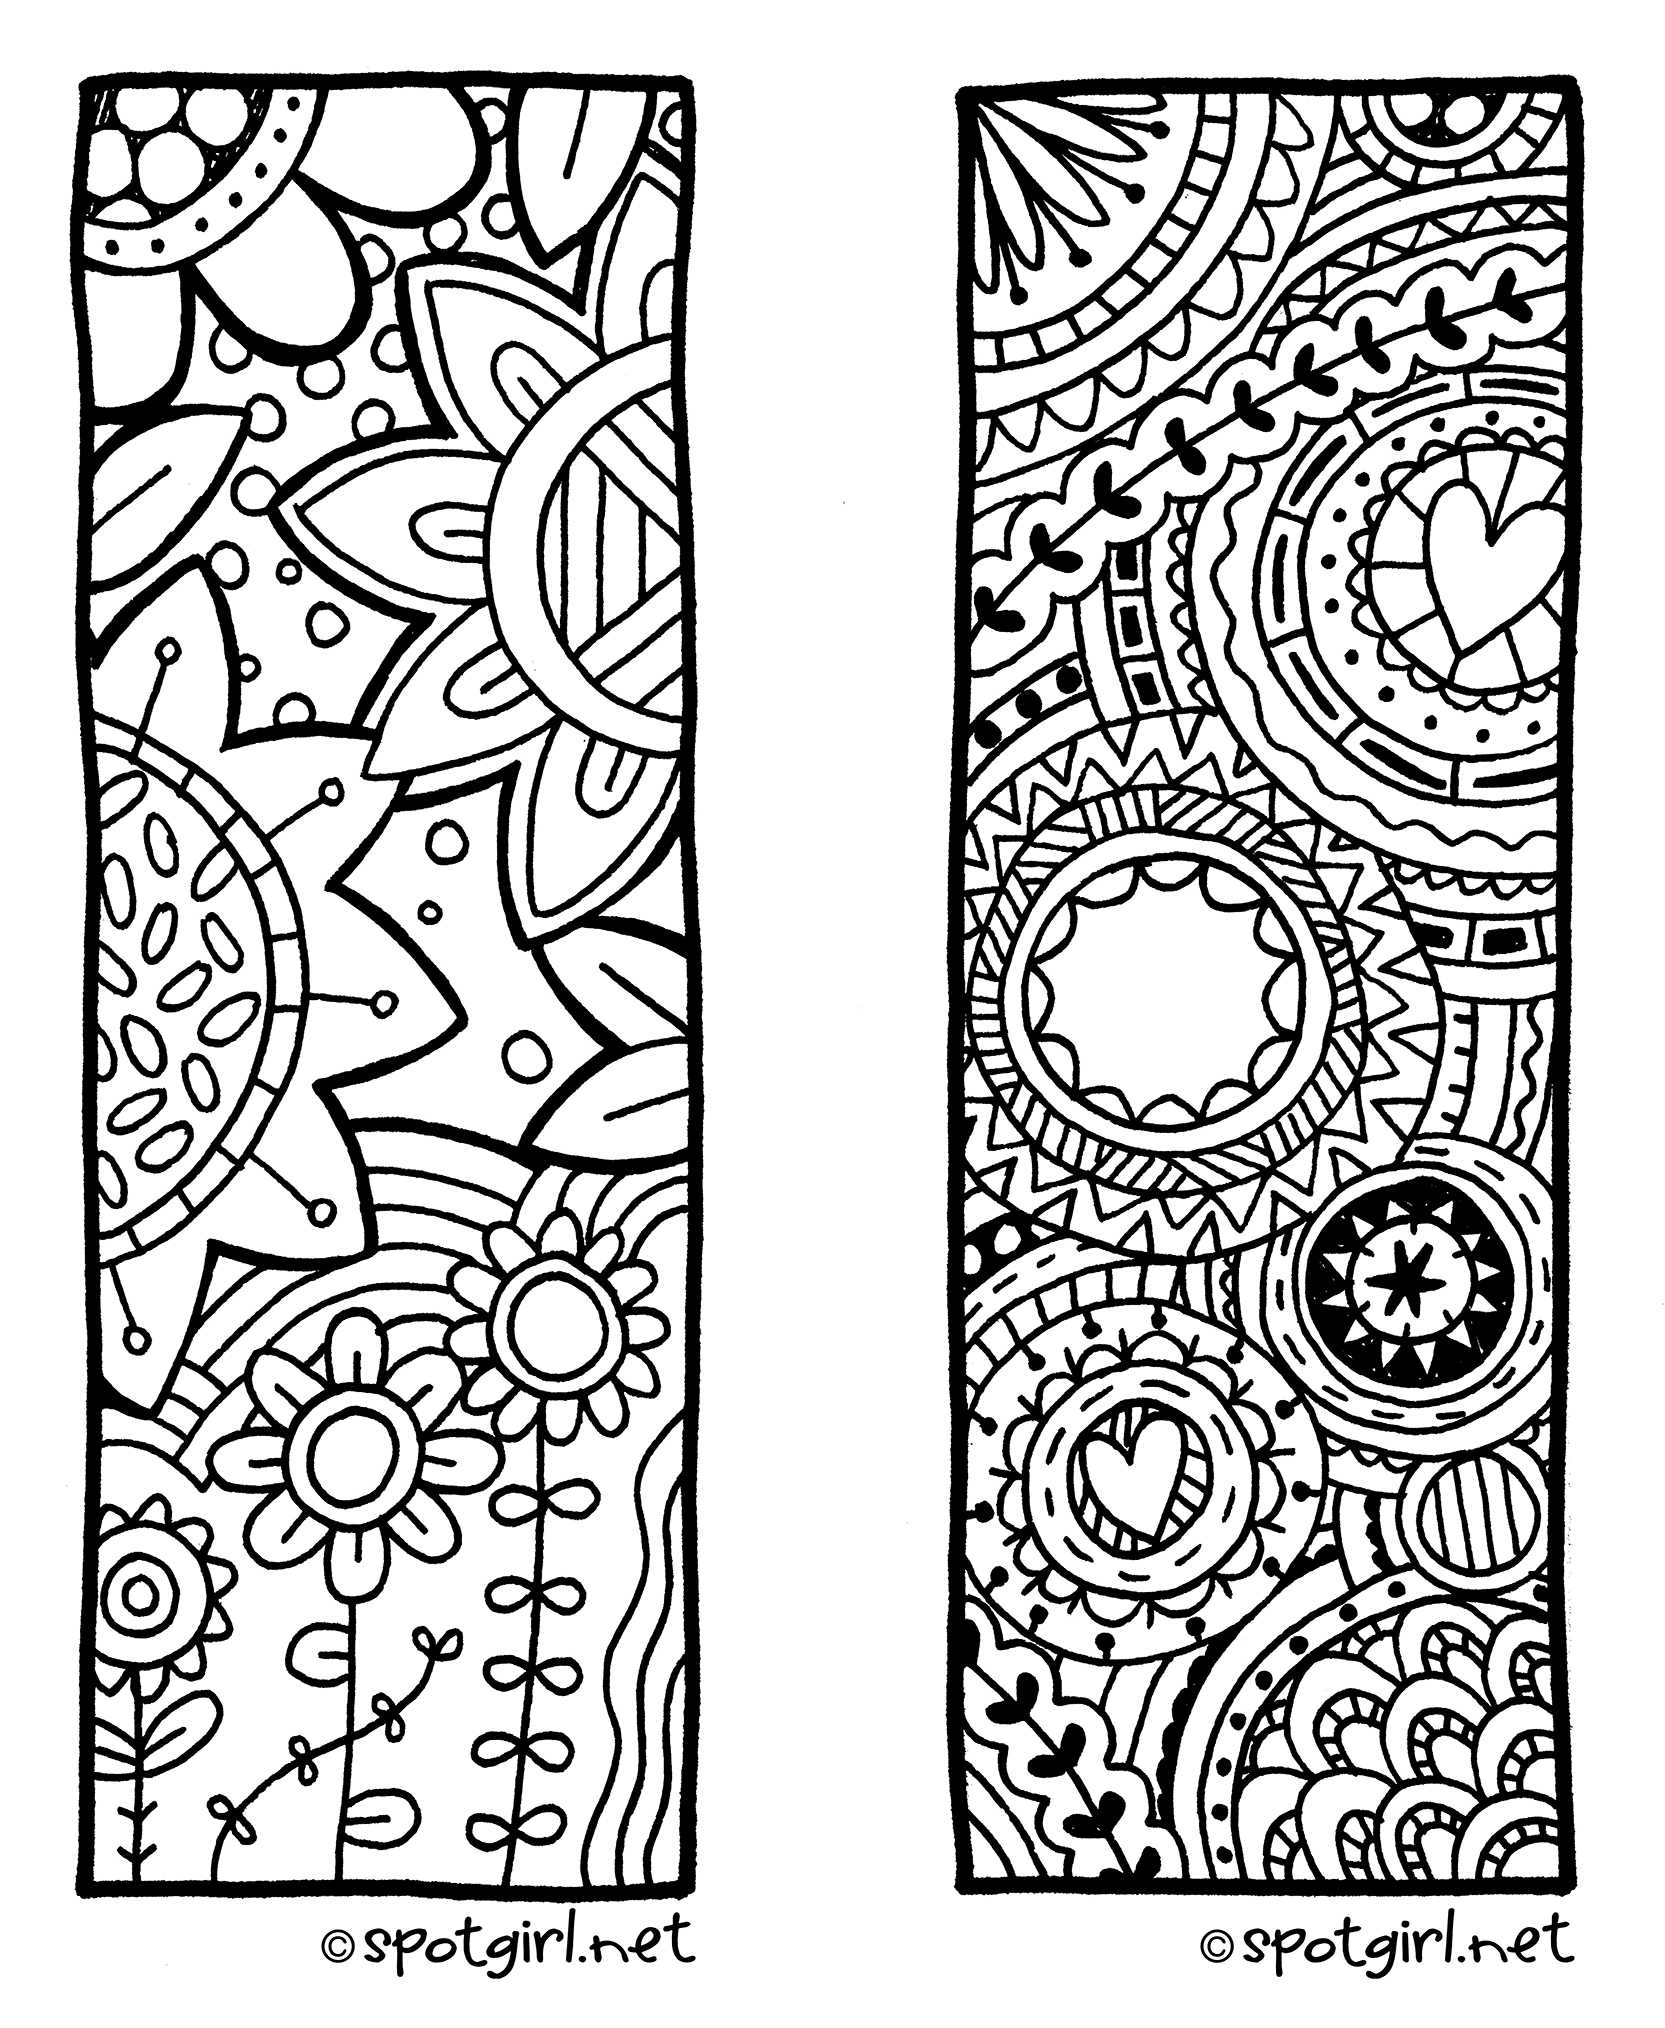 Coloring Pages : 58 Astonishing Free Bookmarks To Color With Free Blank Bookmark Templates To Print